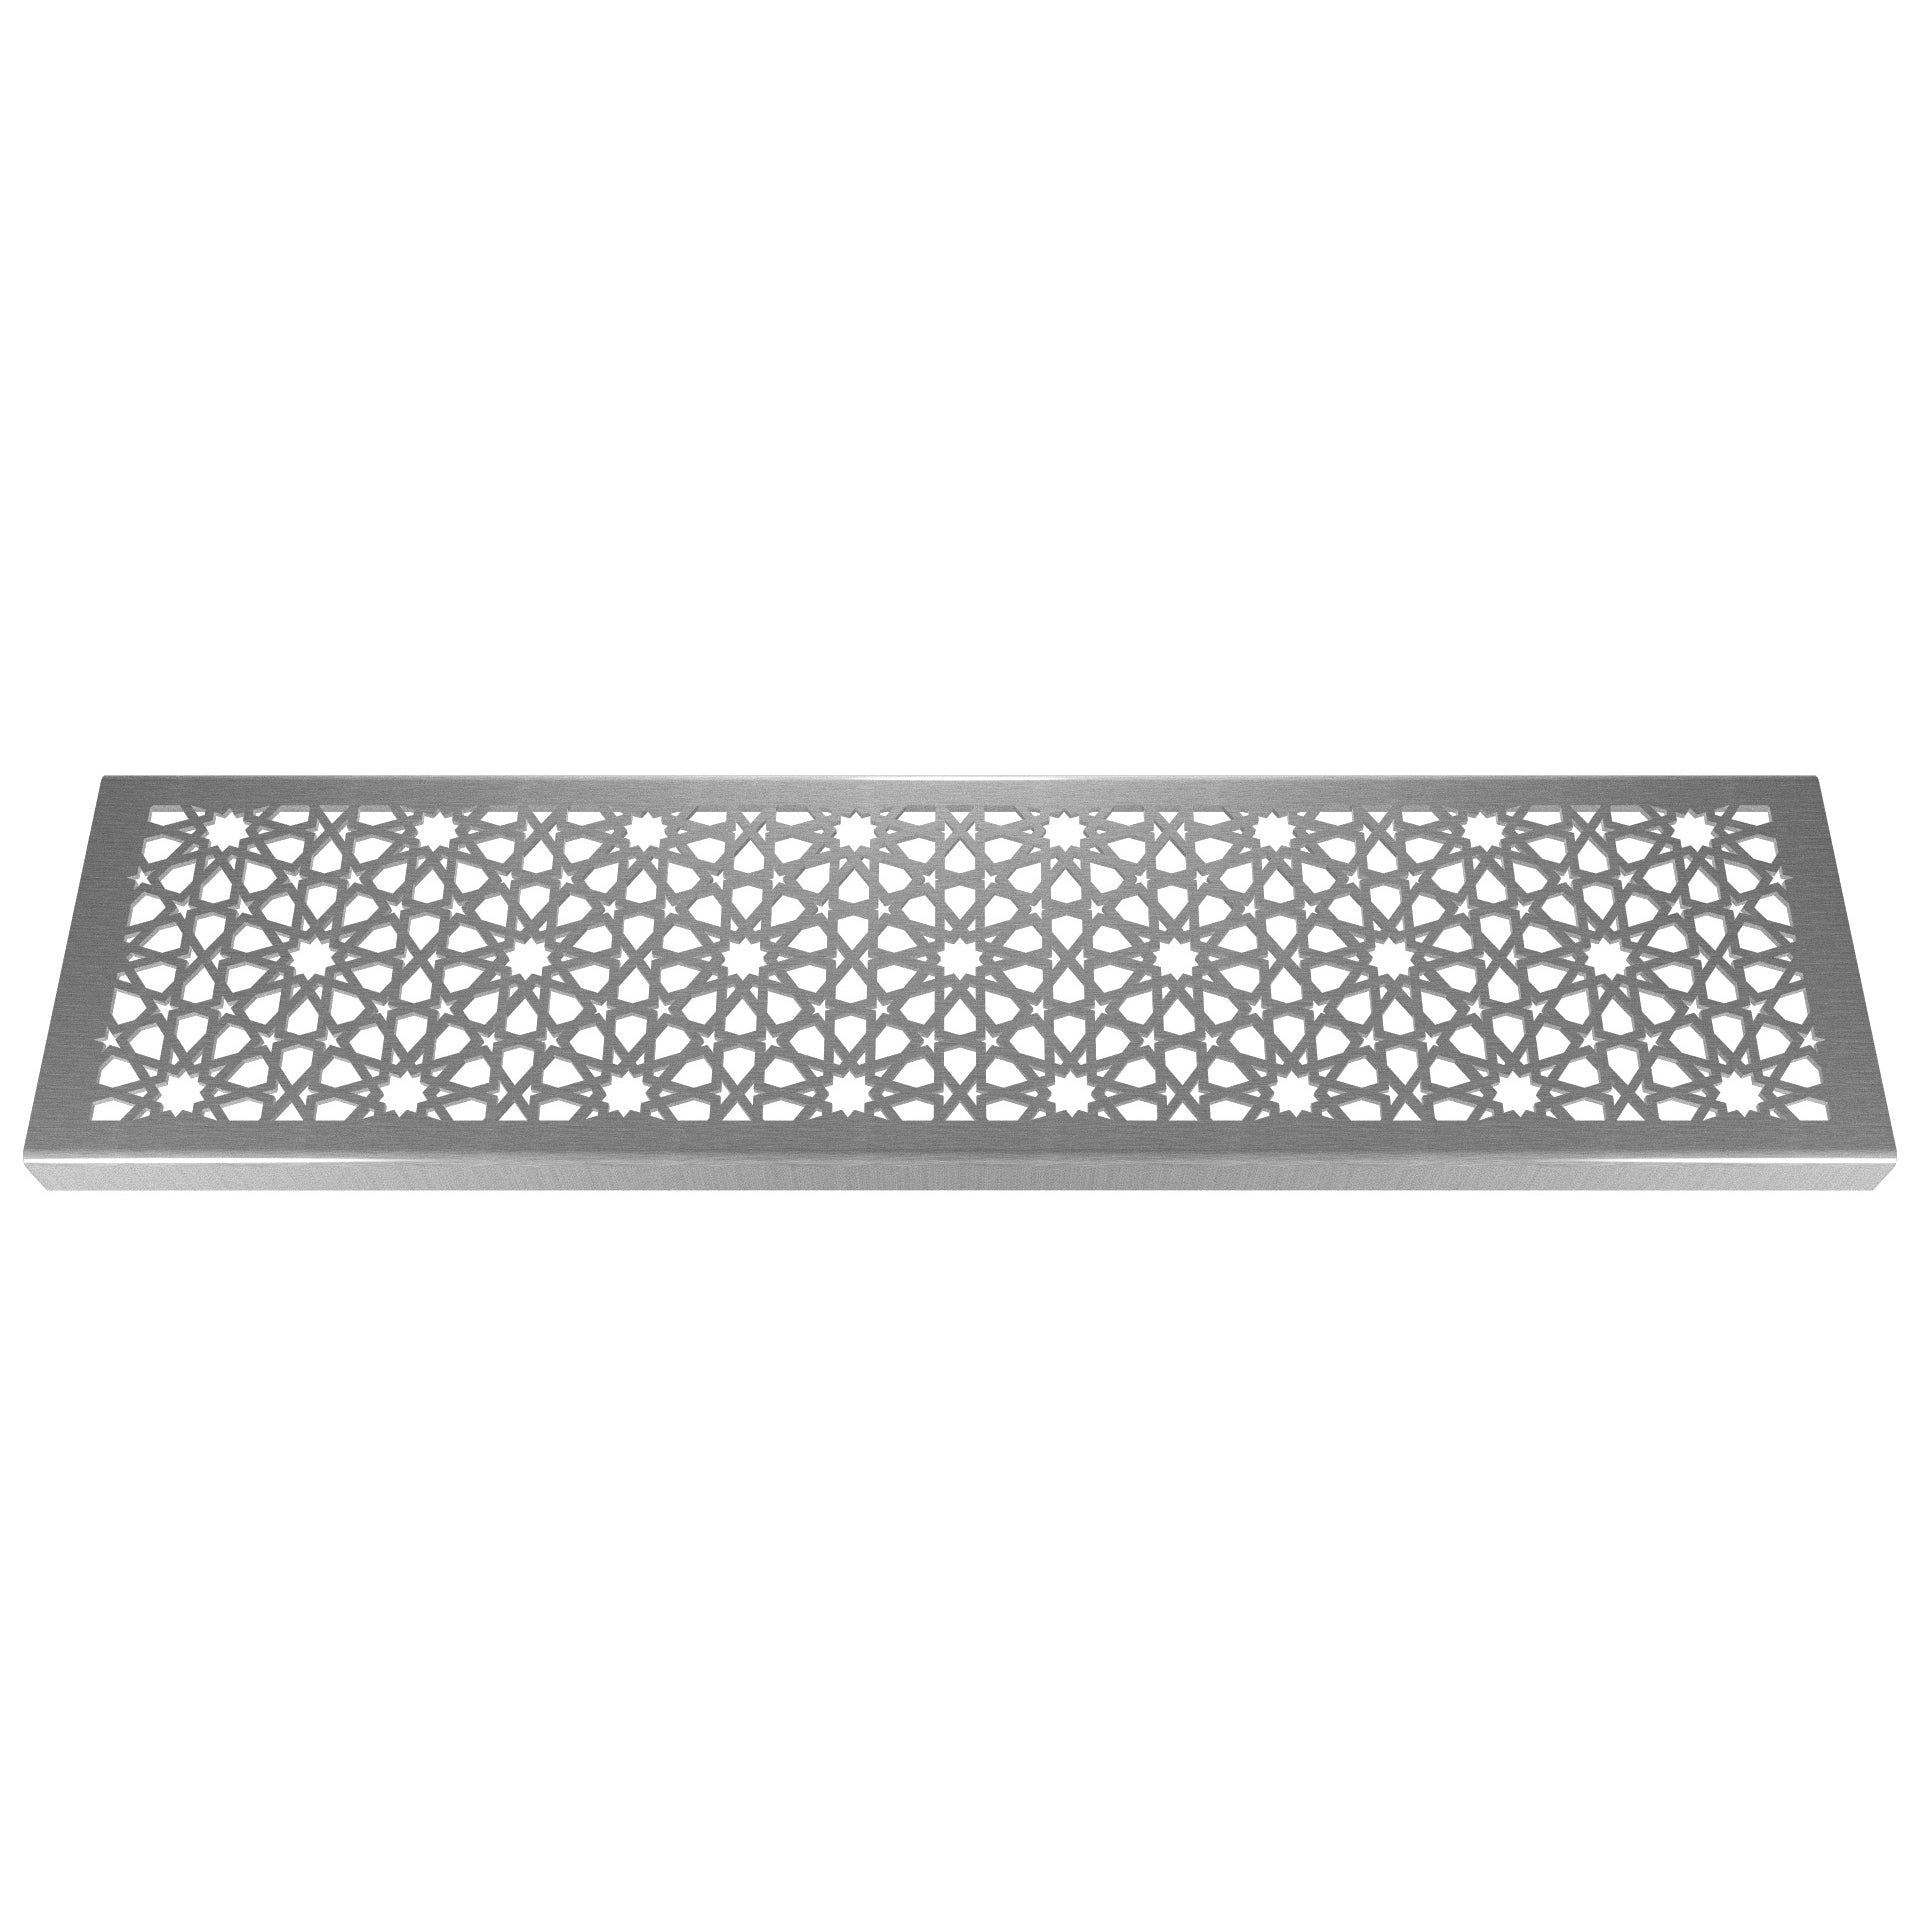 [CLEARANCE] Morisco 304 Stainless Steel Channel Drain Grate 125 x 1150mm (5 Inch)